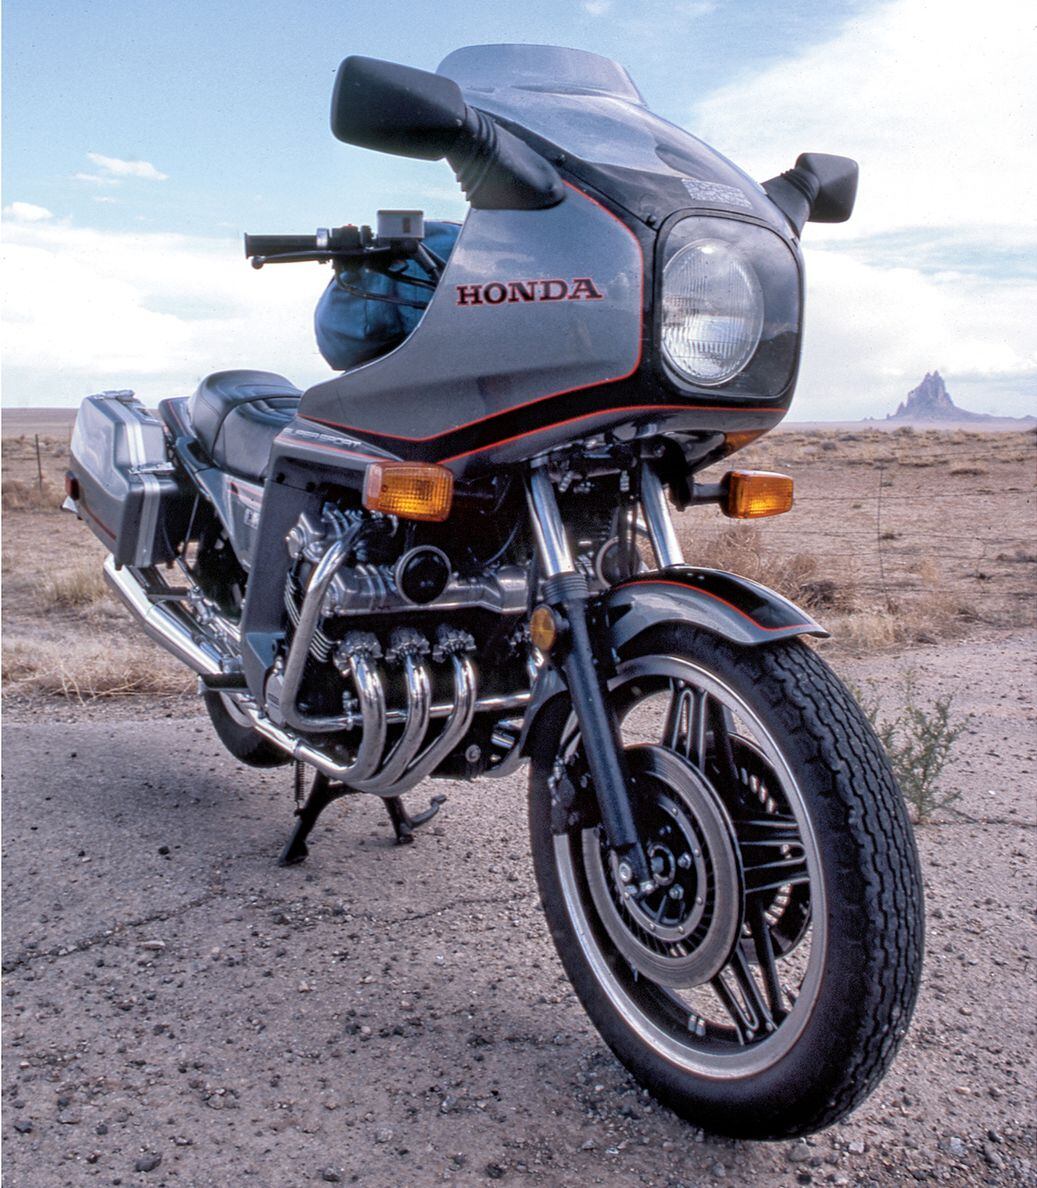 The Honda CBX 1000 Was an 80s 6-Cylinder Superbike